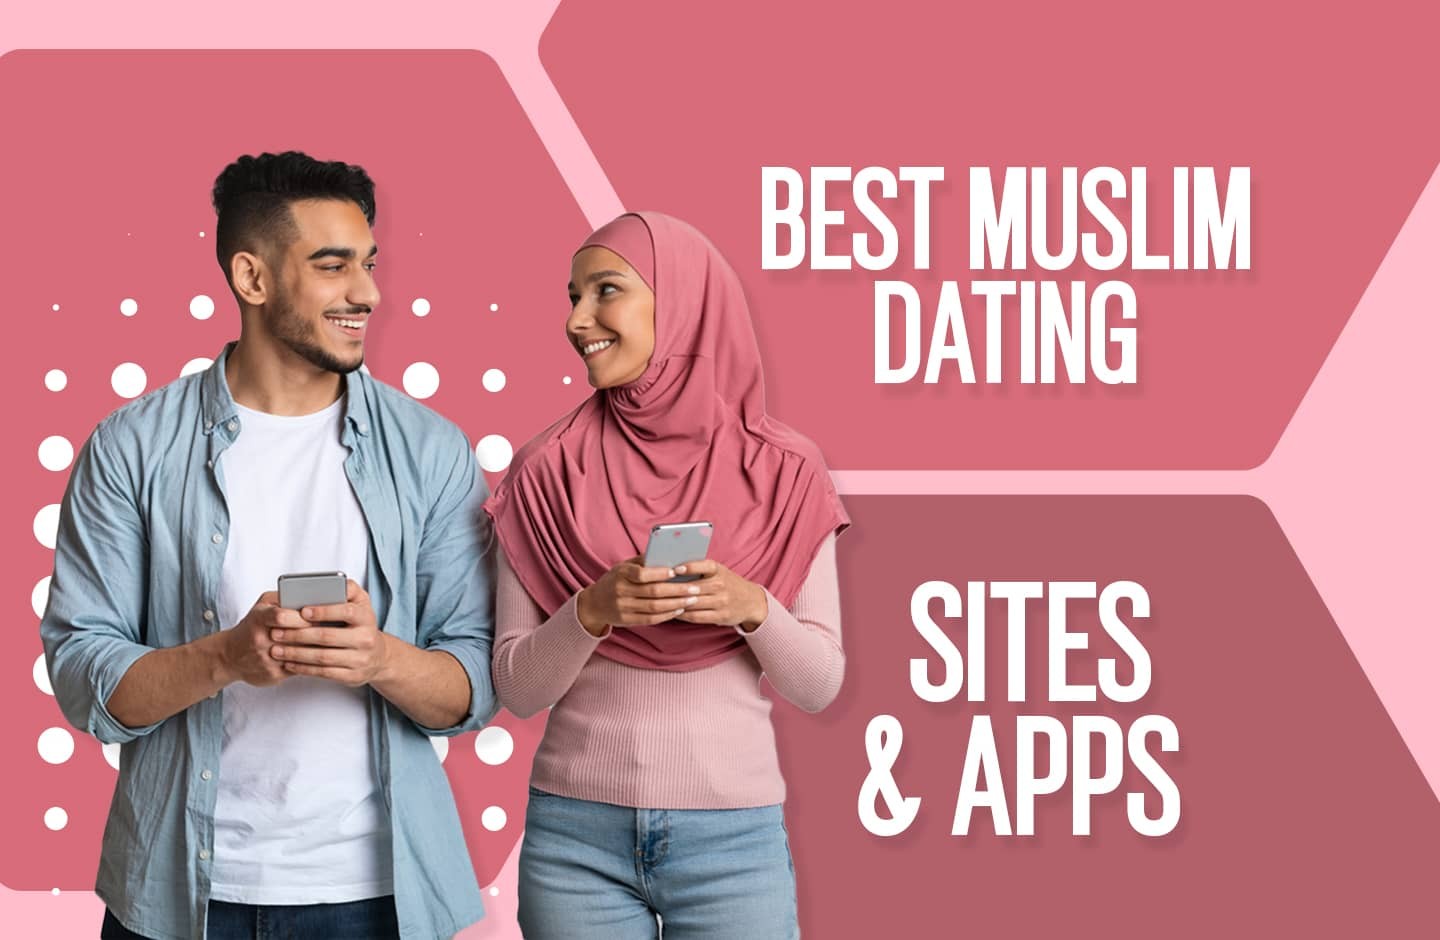 Best Dating Sites And Apps of 2021: Online & Free to Use